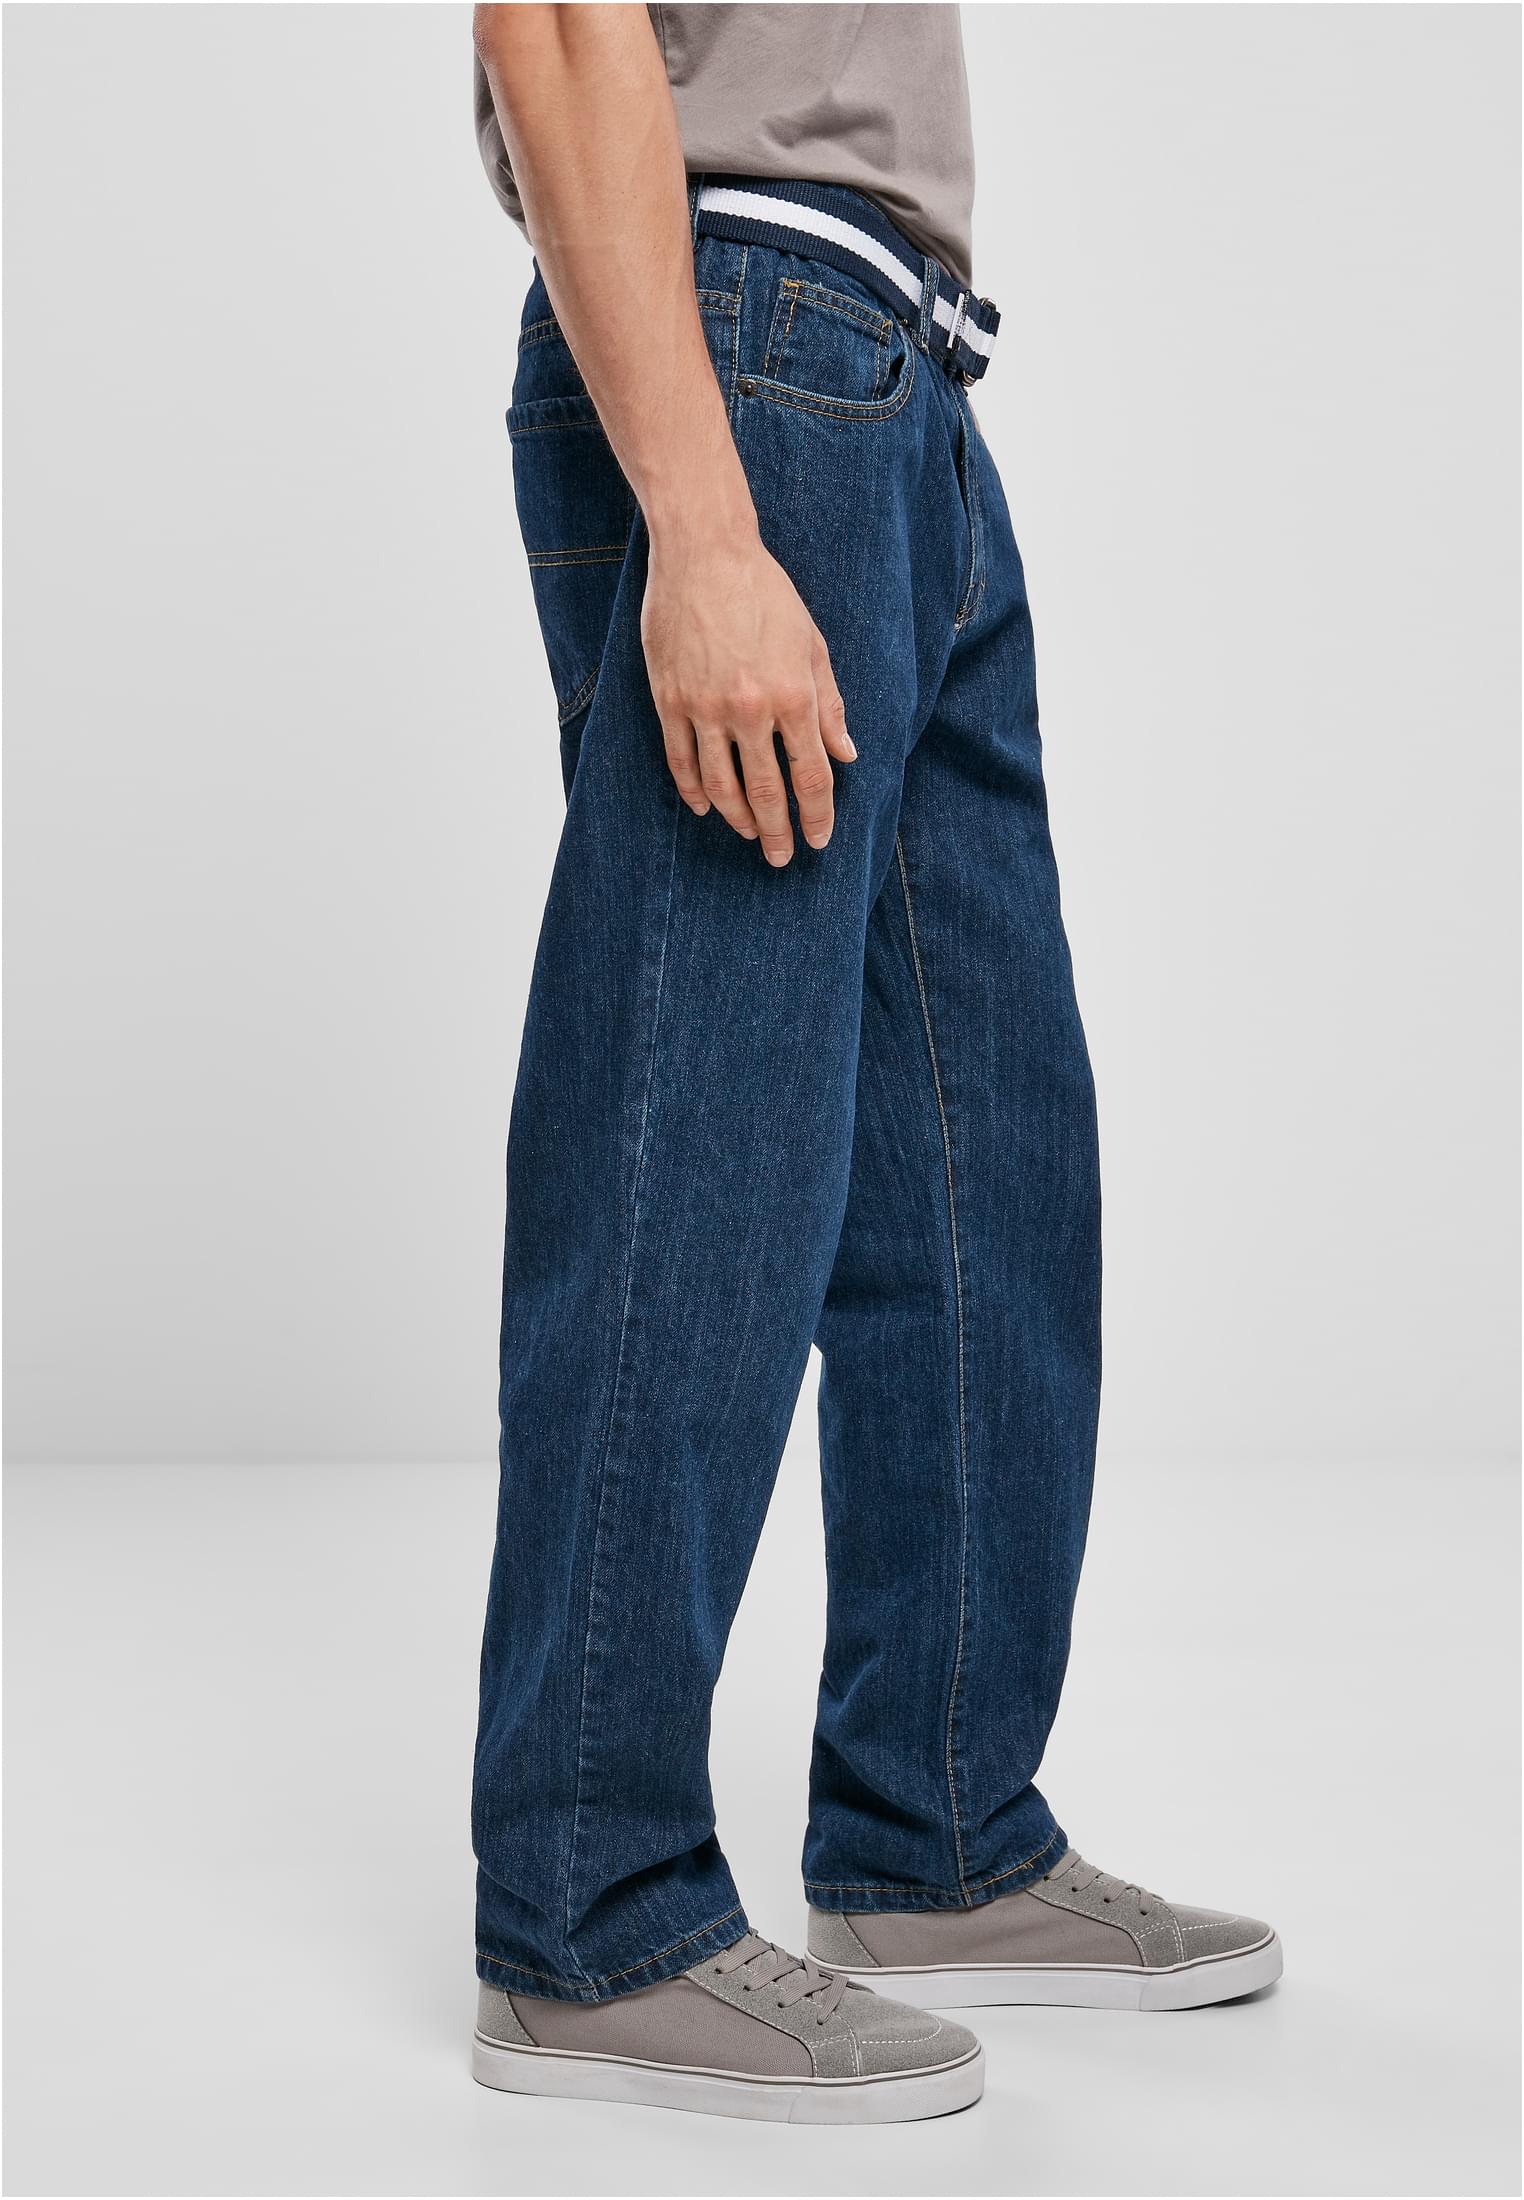 Hosen Loose Fit Jeans in Farbe mid indigo